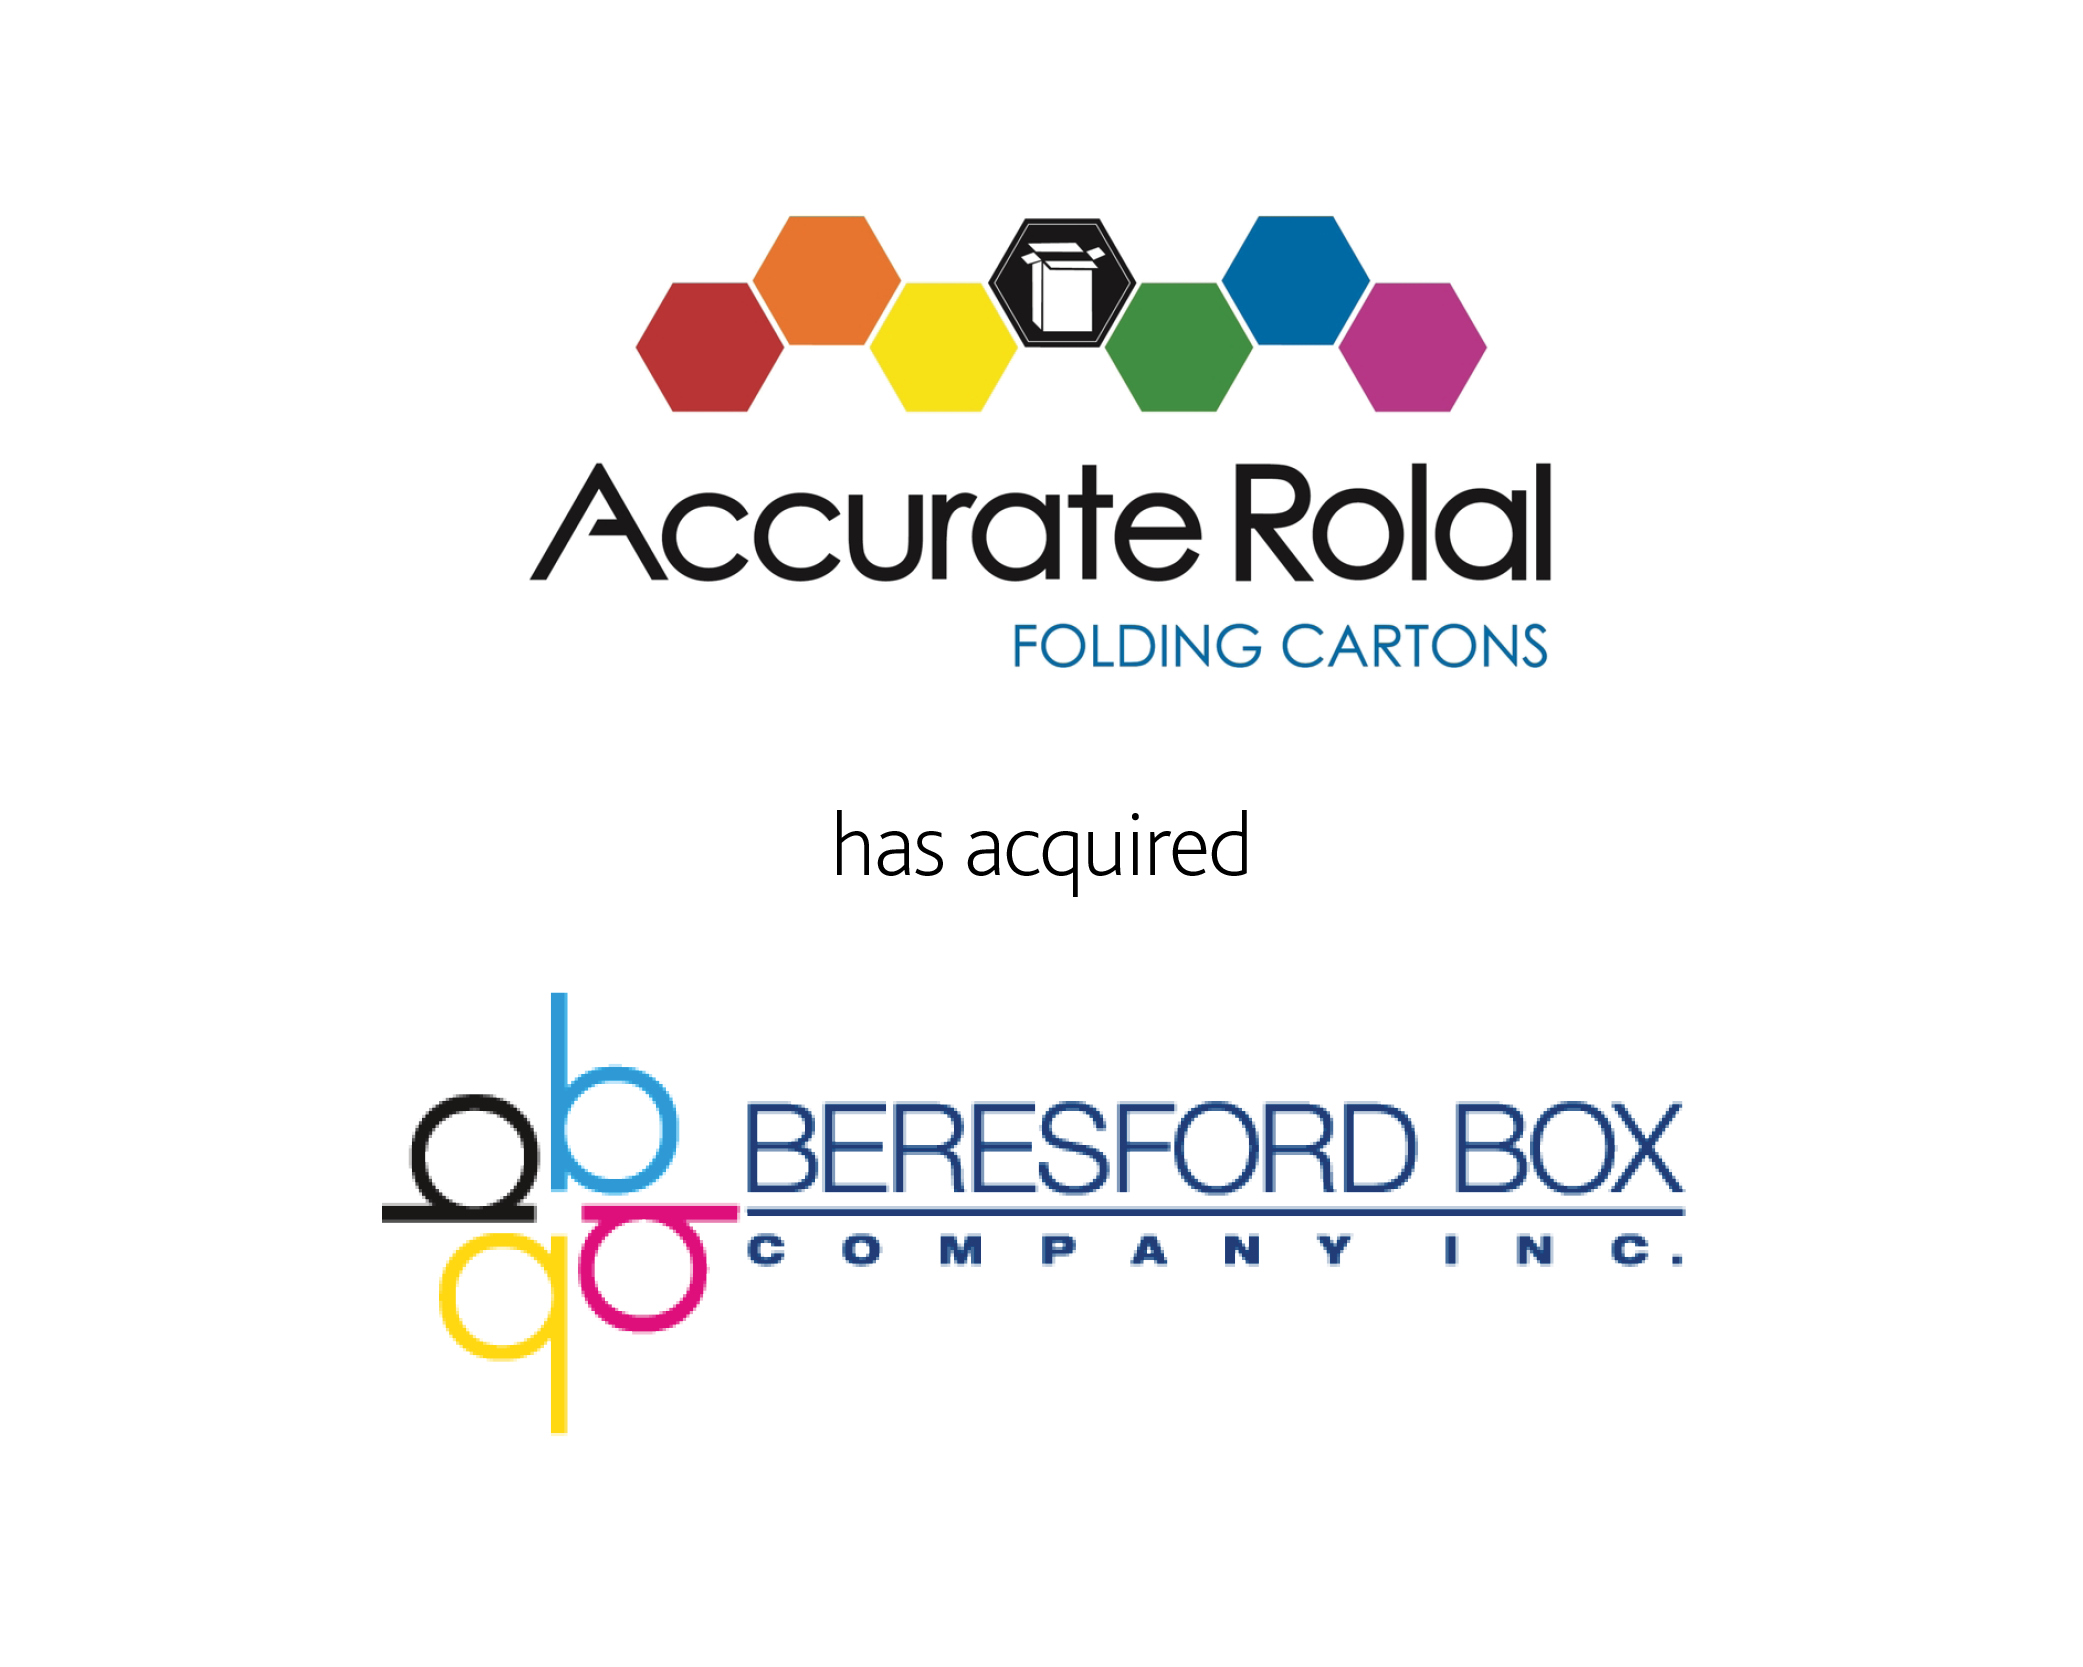 Accurate Rolal Co. Inc. has acquired Beresford Box Company Inc.